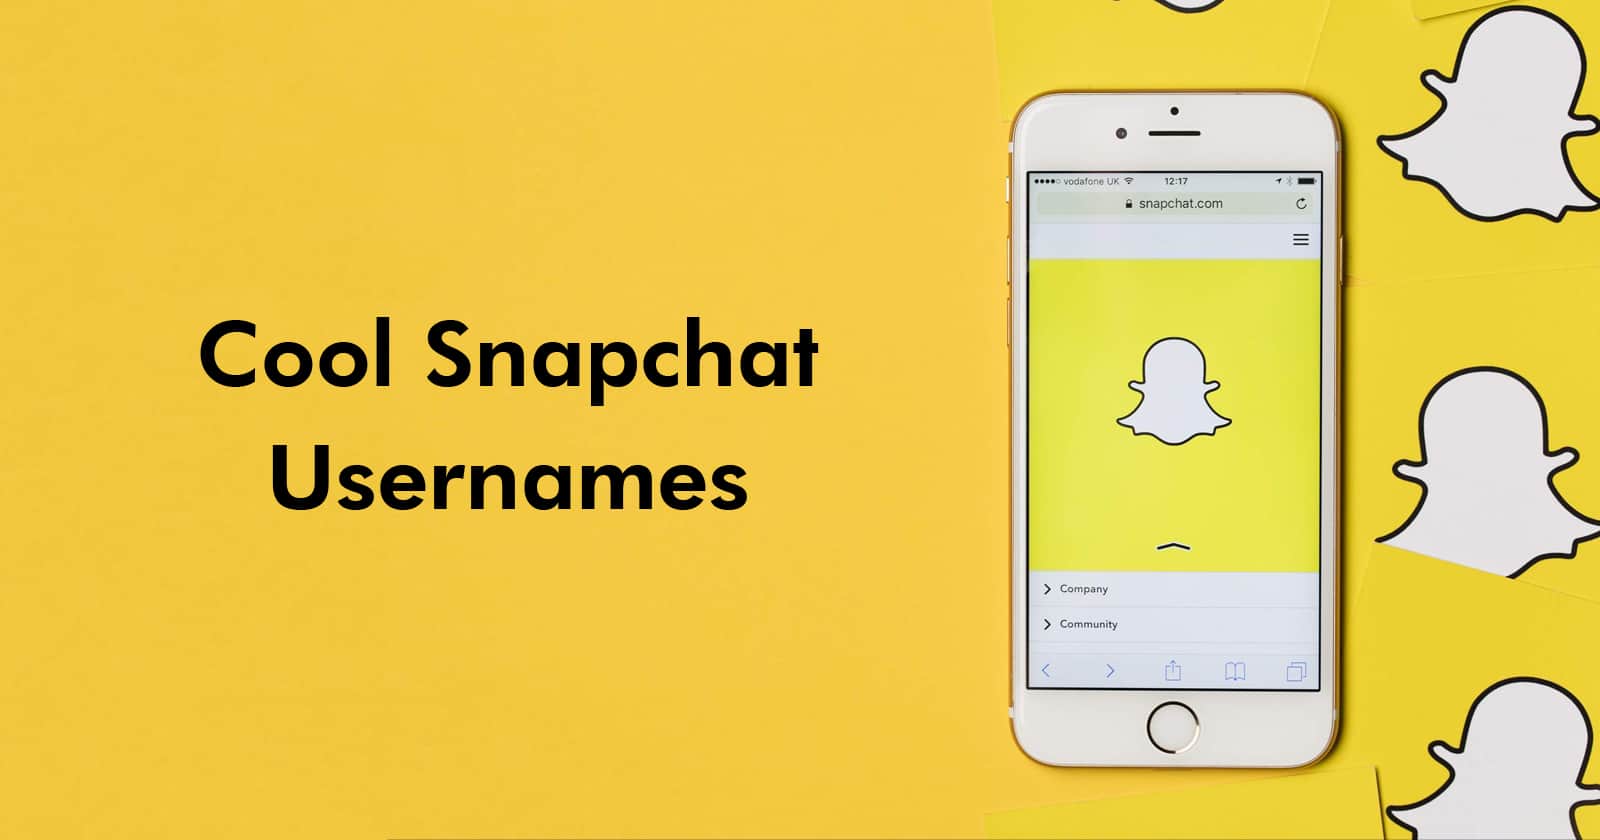 barbara c wilson recommends Snapchat Names That Send Dirty Pics